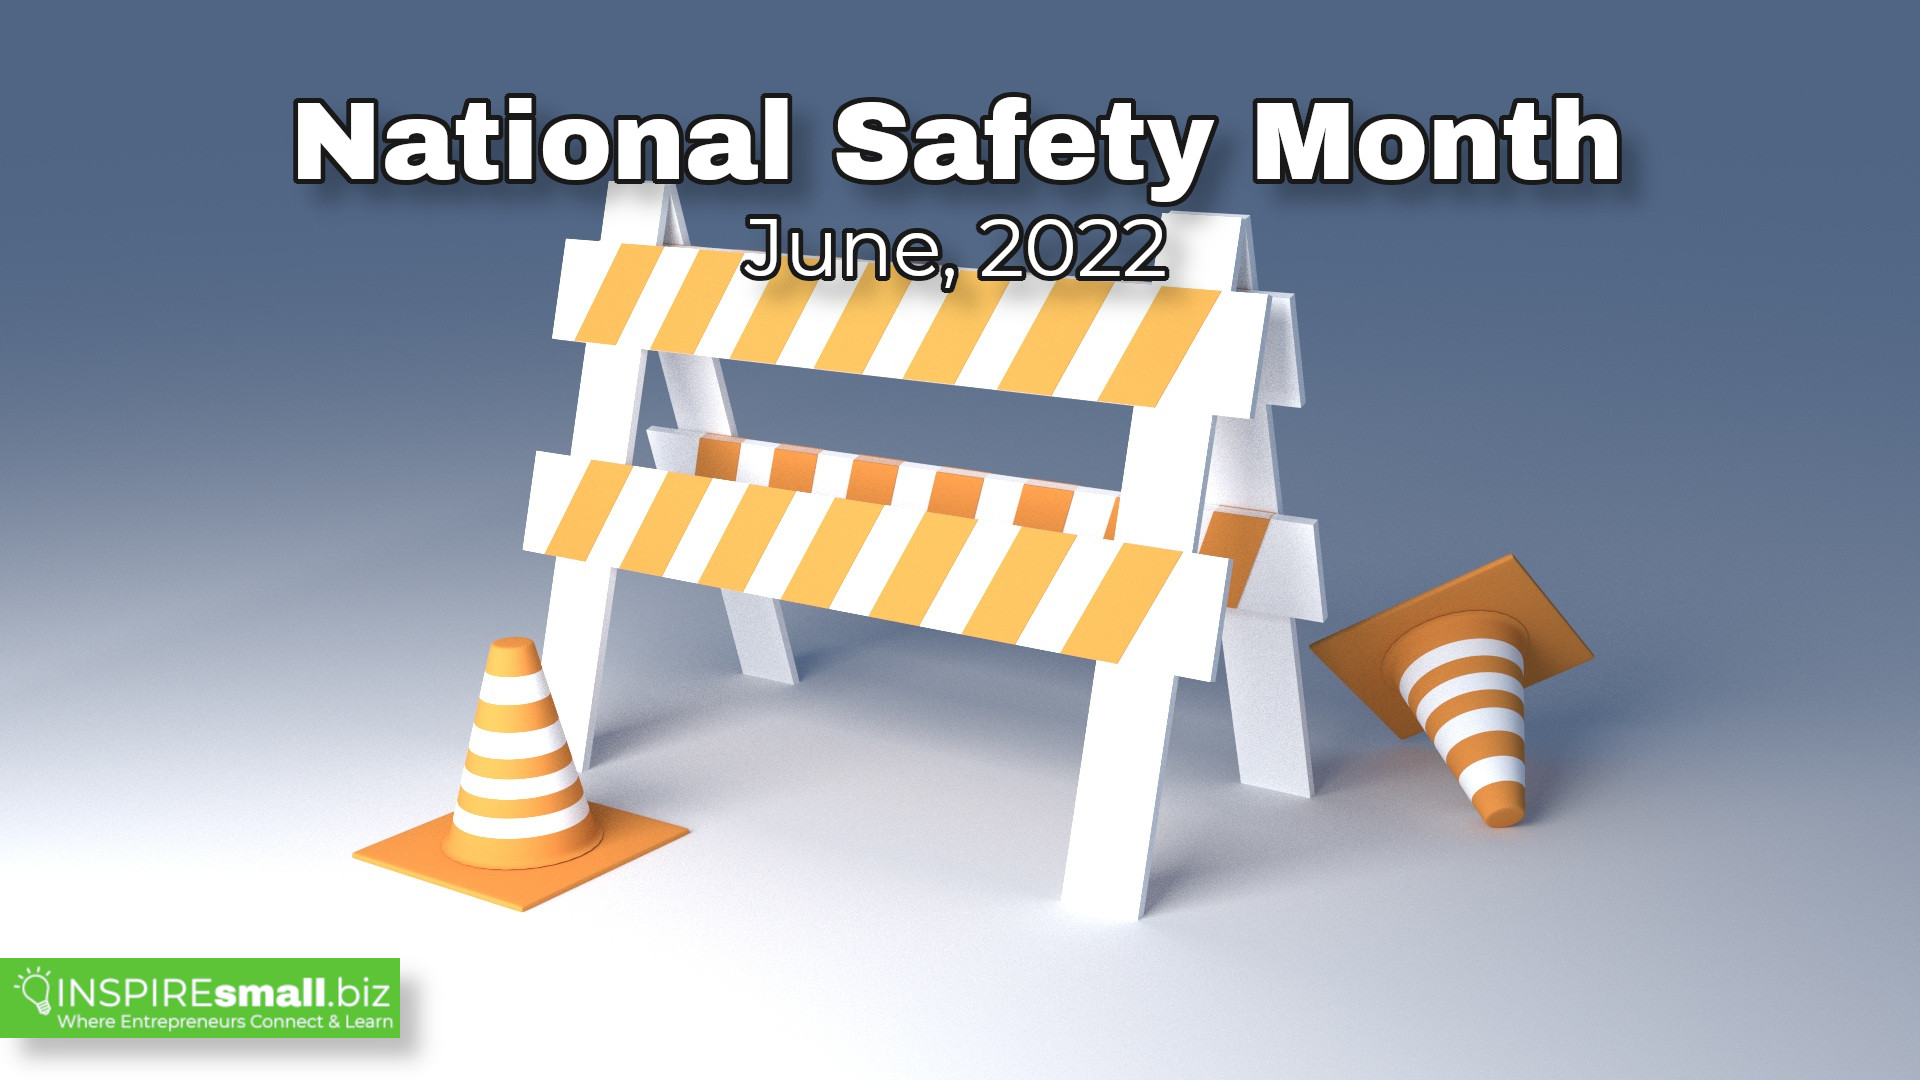 June is National Safety Month, a monthly theme from INSPIREsmall.biz, with some road construction orange and white cones, and a orange and white traffic barrier.